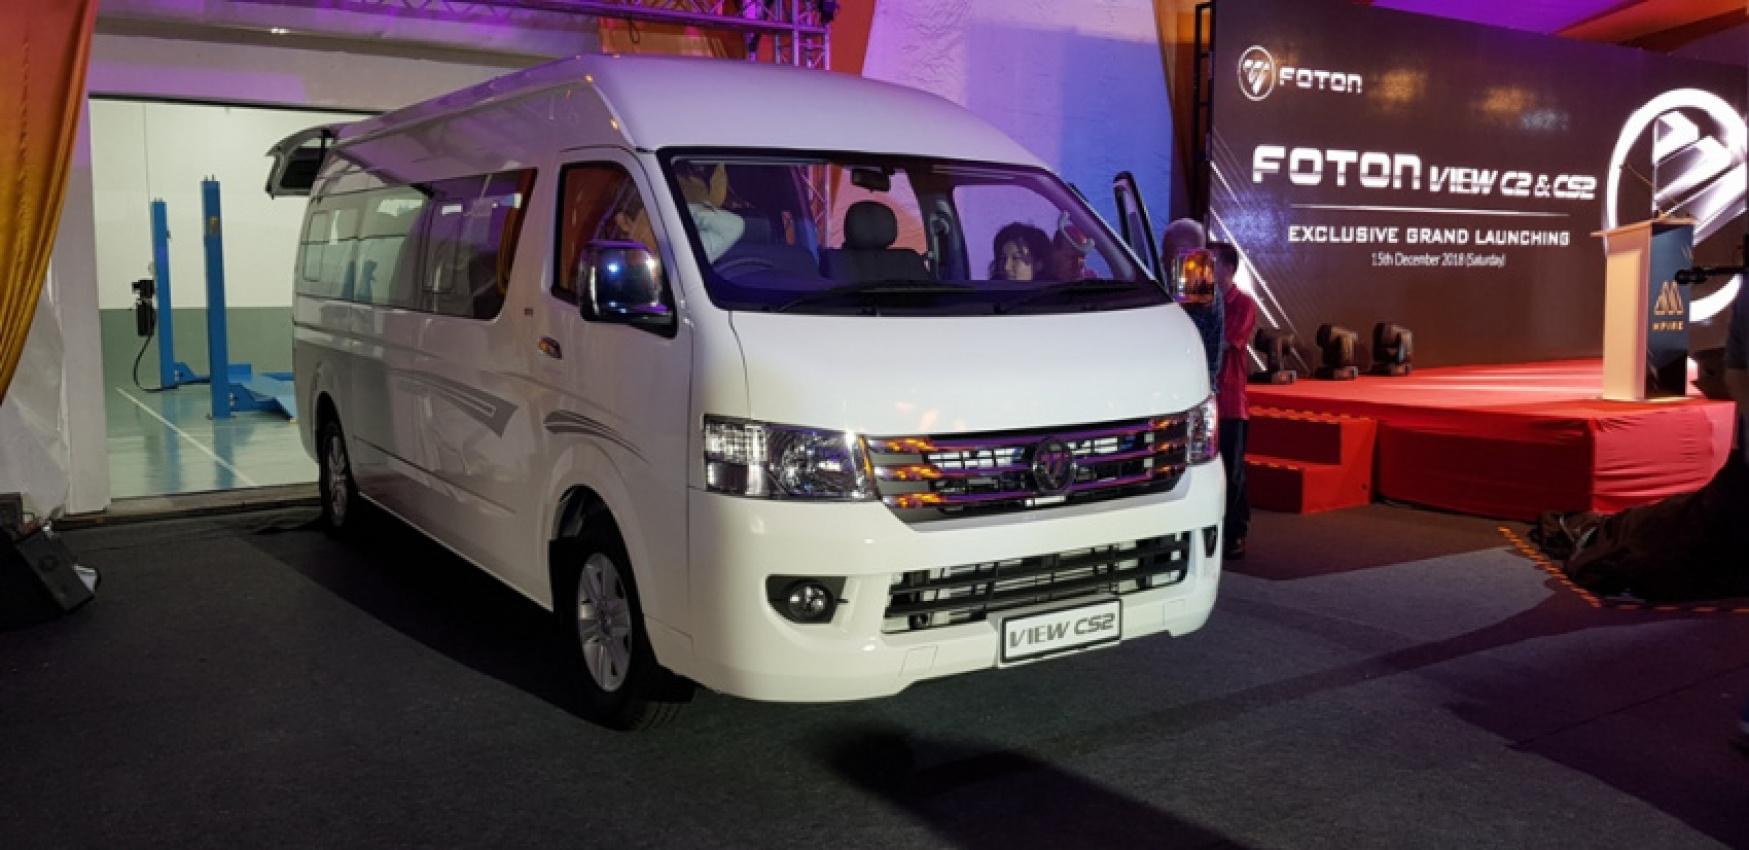 autos, cars, commercial vehicles, 3s centre, commercial vehicles, foton, malaysia, mpire group, service centre, vans, mpire group launches 2 foton vans and 3s centre in klang valley